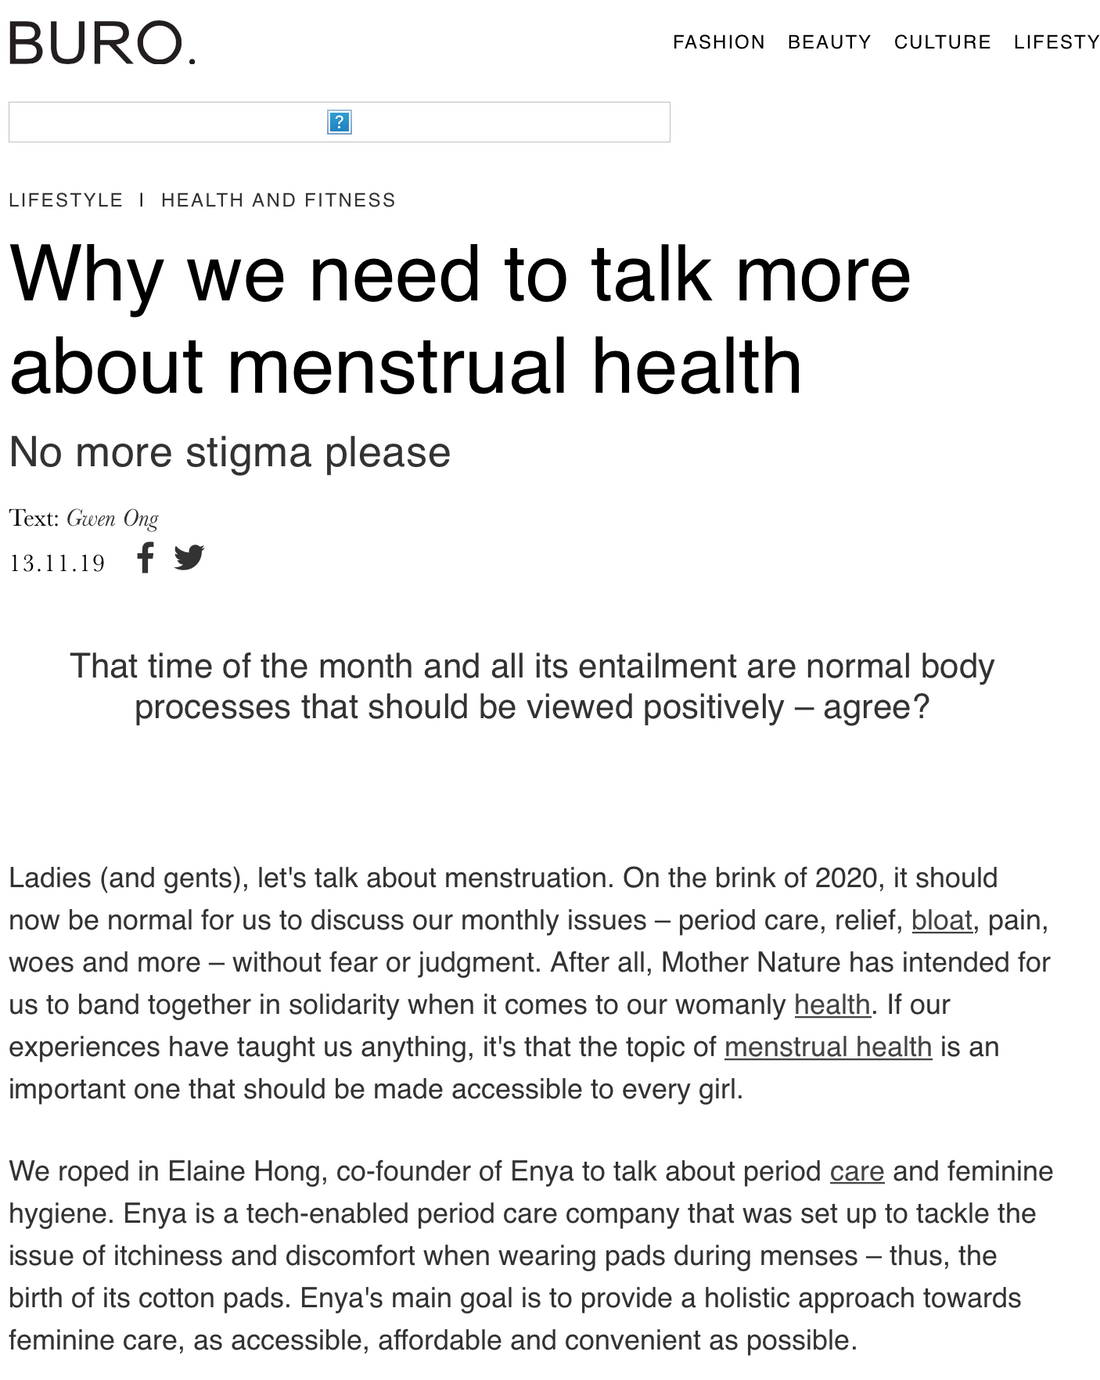 Why we need to talk more about menstrual health - No more stigma please